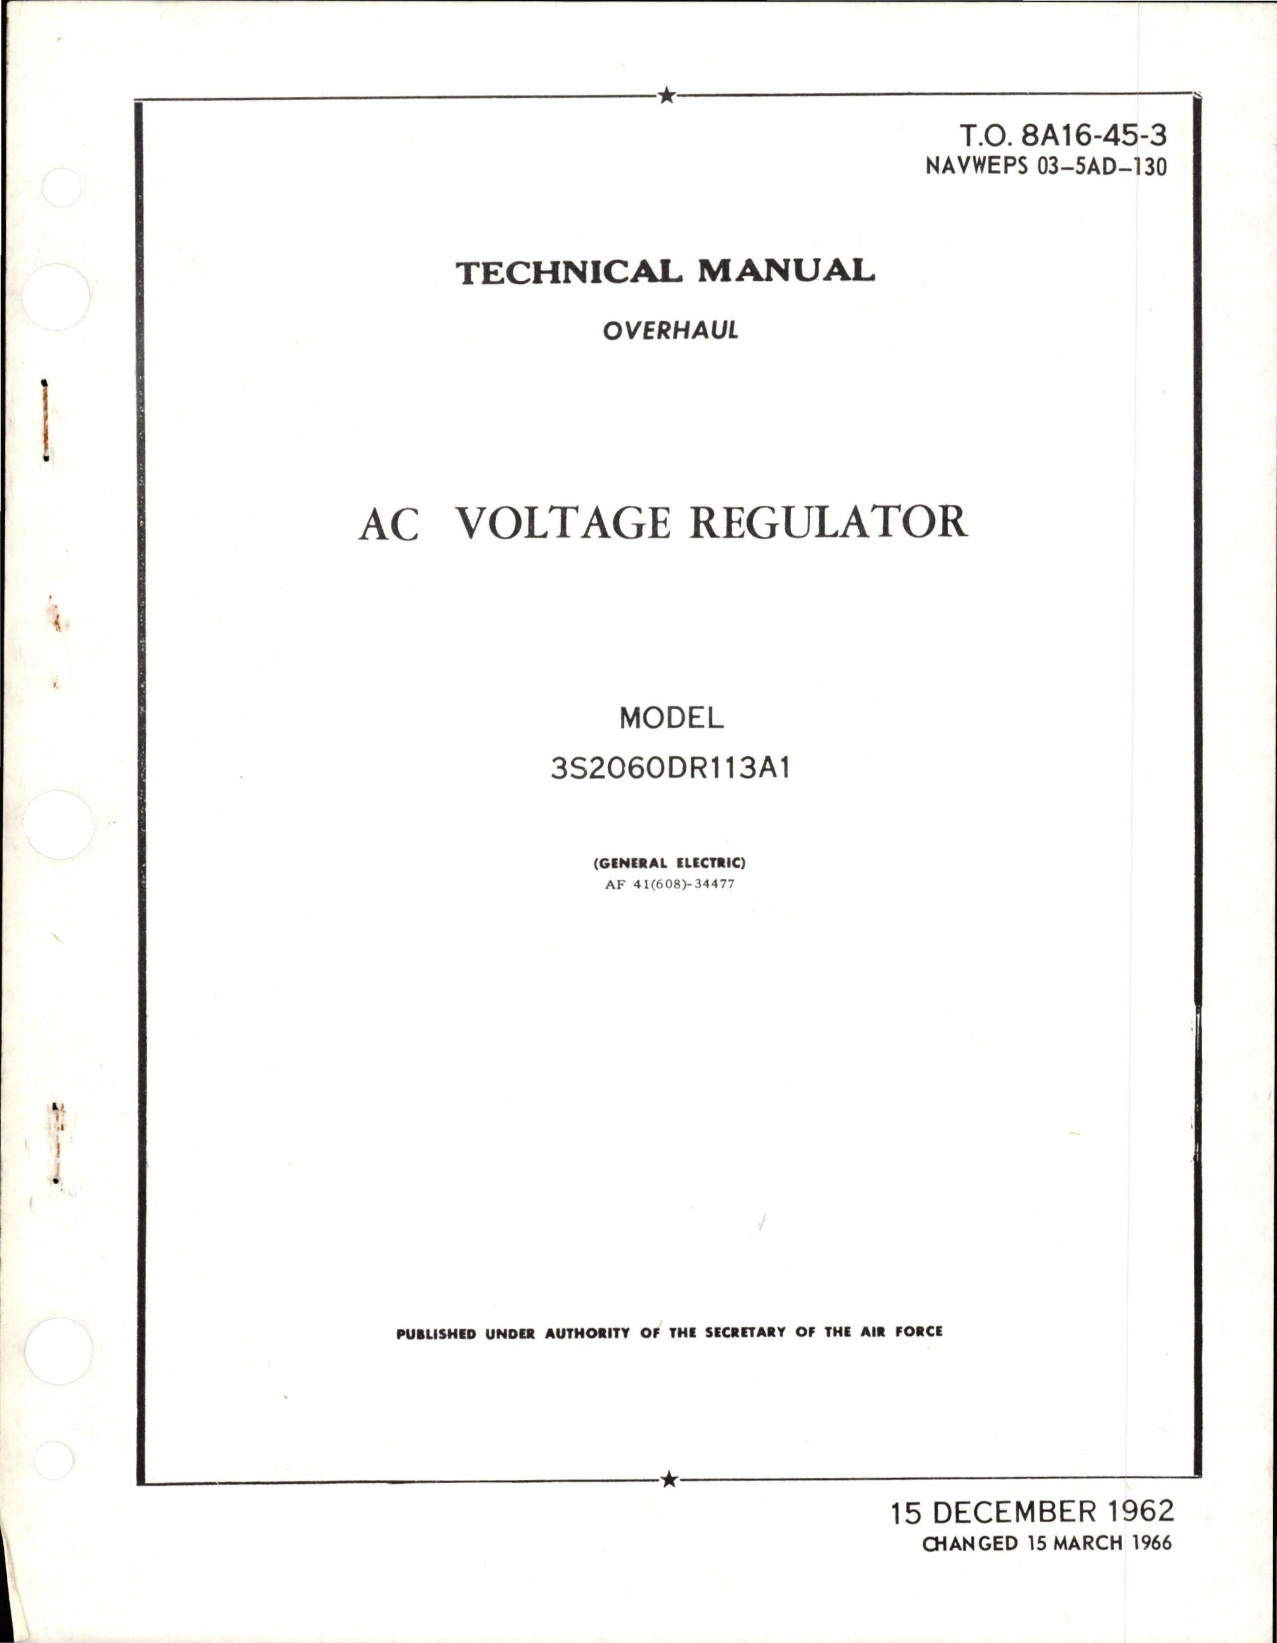 Sample page 1 from AirCorps Library document: Overhaul Instructions for AC Voltage Regulator - Model 3S2060DR113A1 